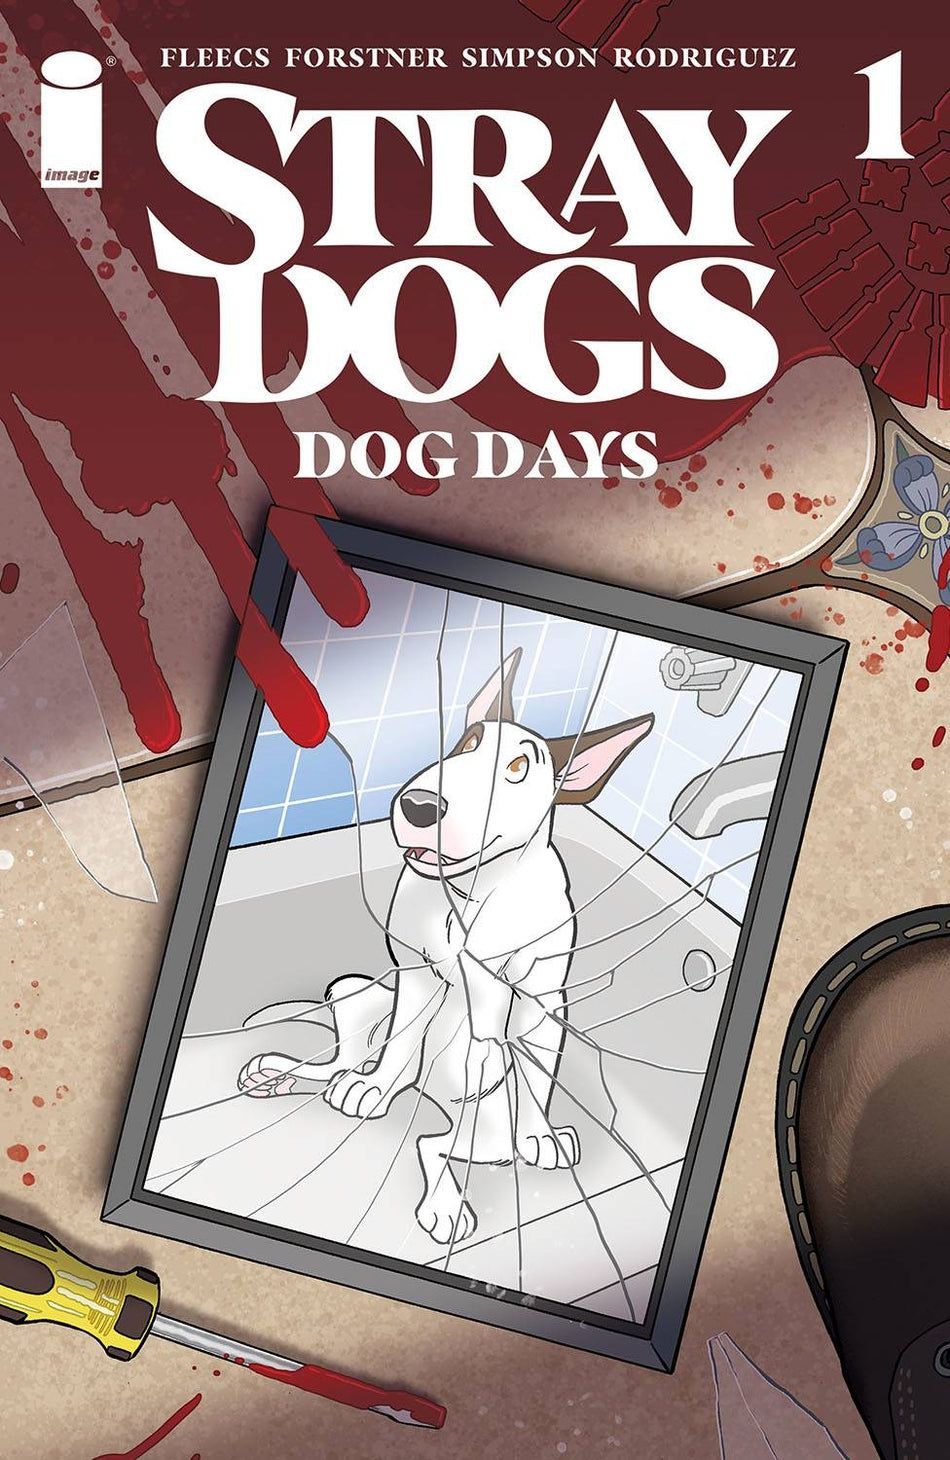 Photo of Stray Dogs Dog Days Issue 1 (of 2) CVR A Forstner & Fleecs comic sold by Stronghold Collectibles